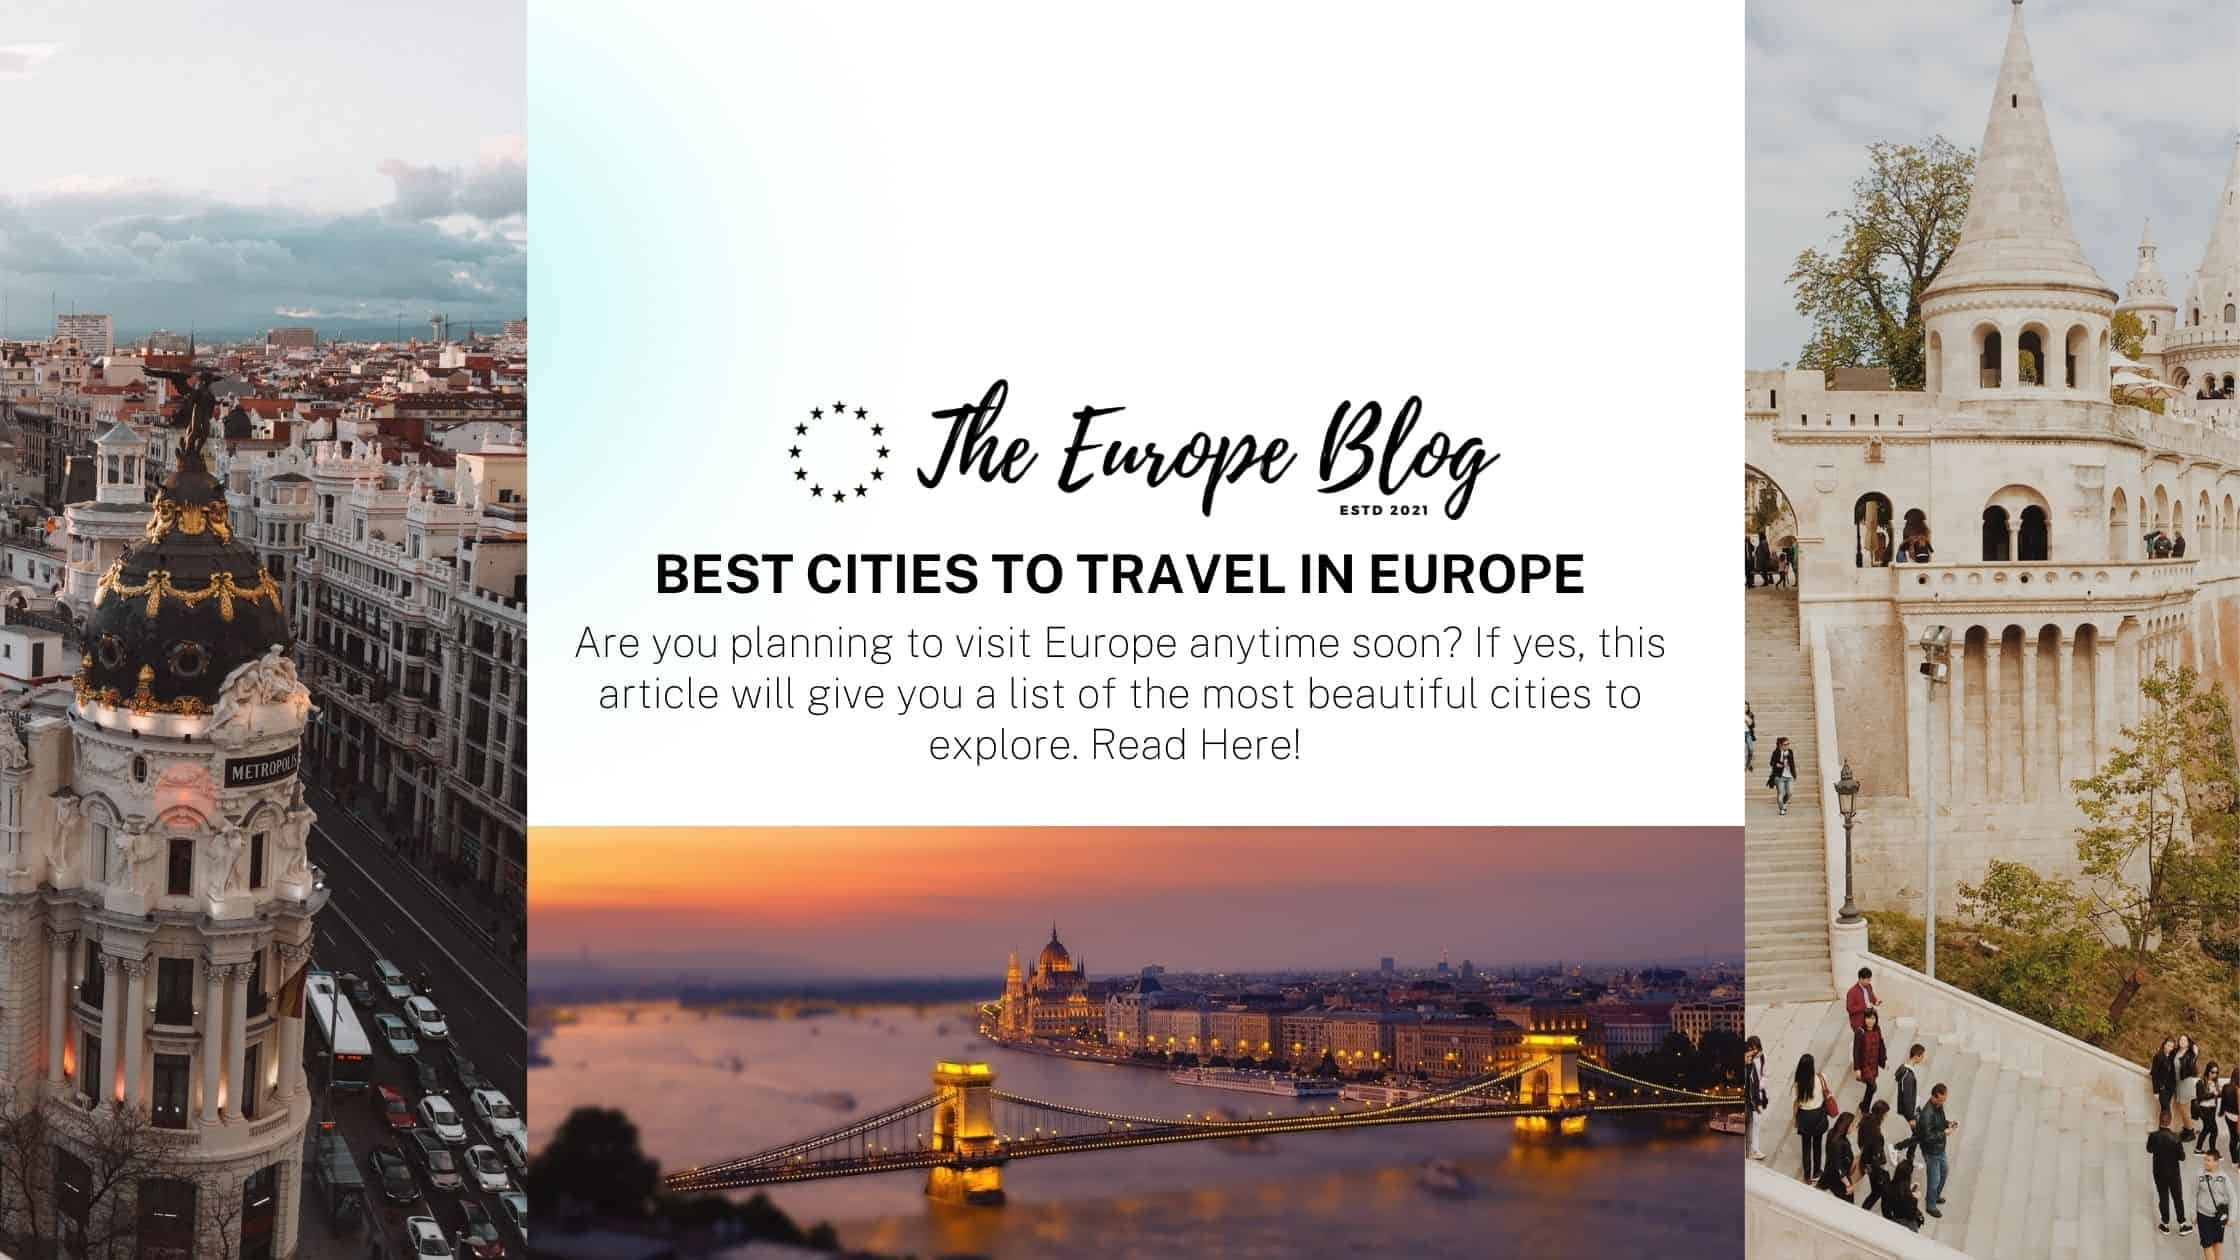 Best Cities to Travel in Europe